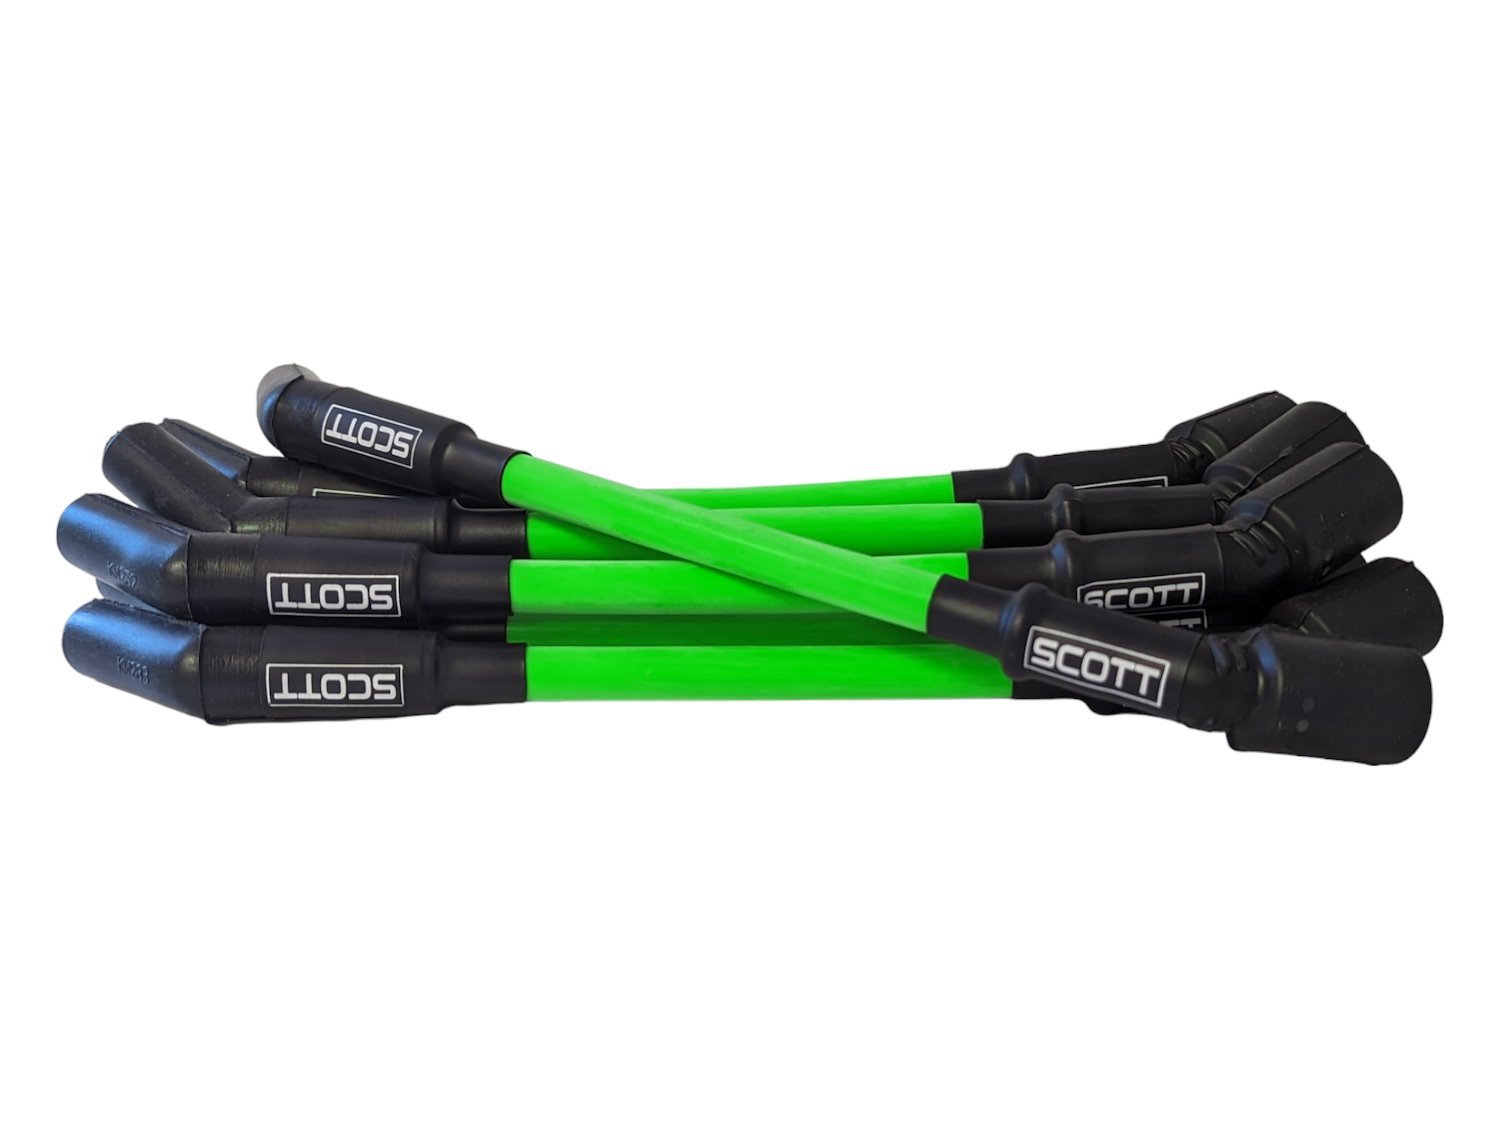 SPW-CH-LT-GEN5-8 High-Performance Silicone-Sleeved Spark Plug Wire Set for GM LS/LT (Gen5), [Fluorescent Green]